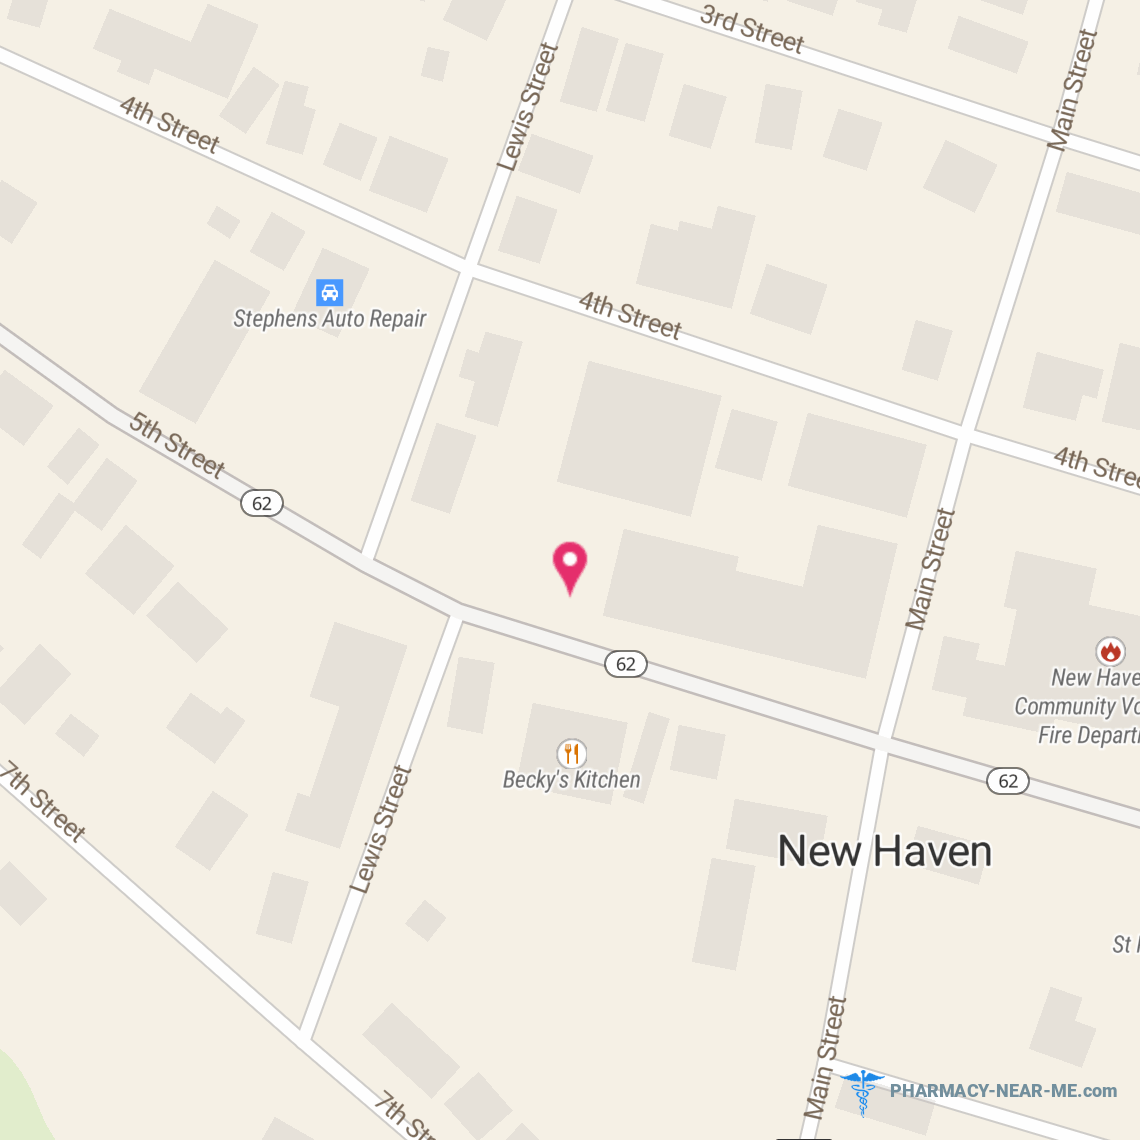 NEW HAVEN PHARMACY LLC - Pharmacy Hours, Phone, Reviews & Information: 307 5th Street, New Haven, West Virginia 25265, United States